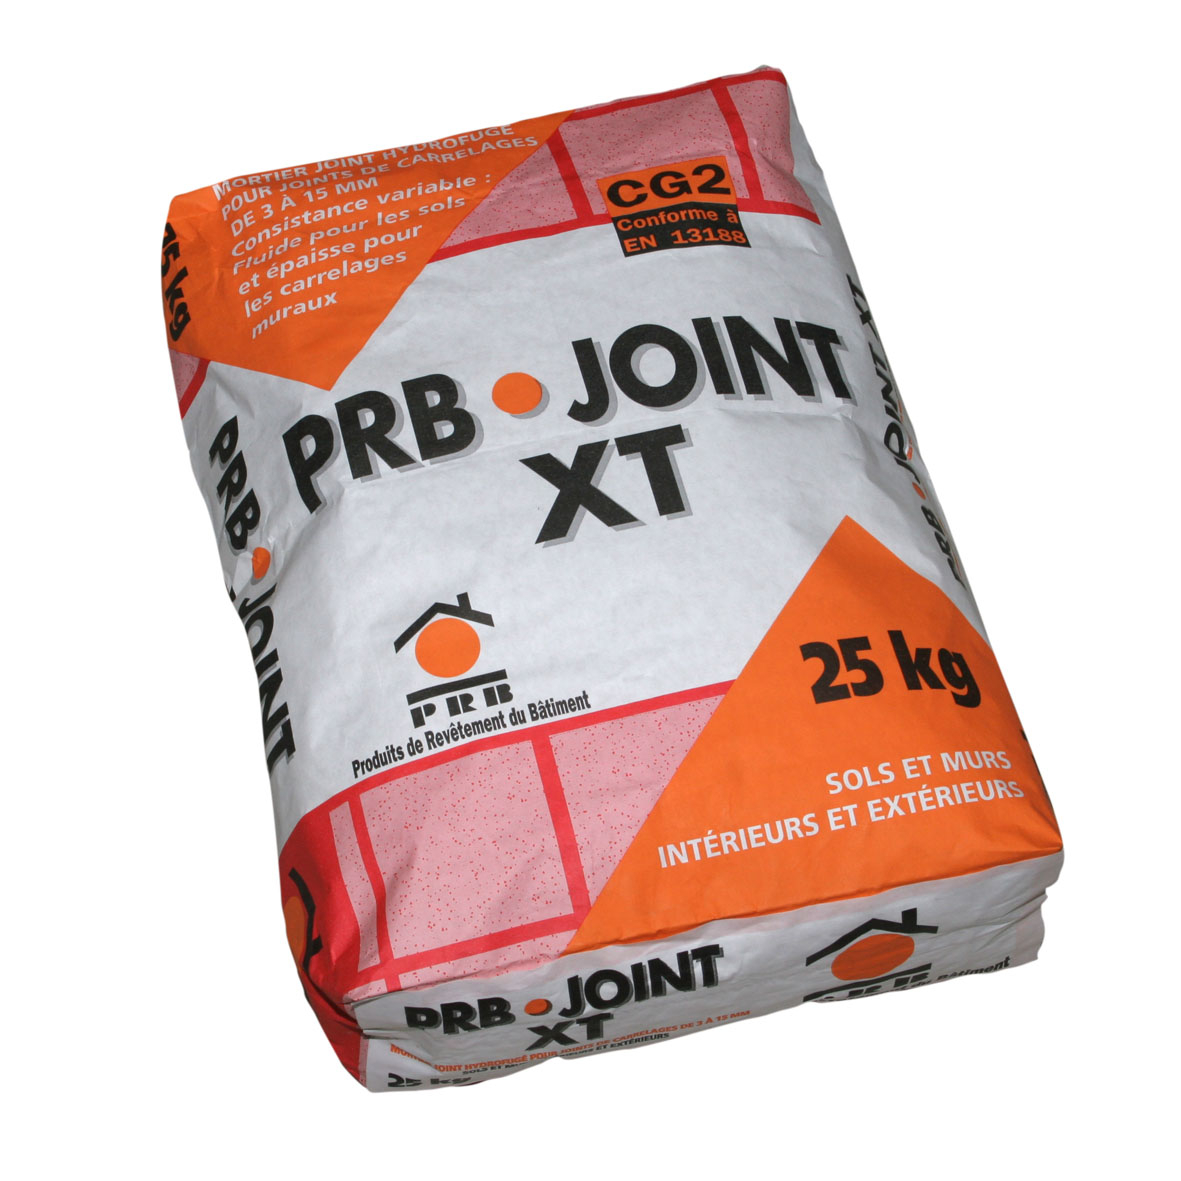 joint-carrelage-prb-joint-xt-25kg-sac-gris-anthracite-0